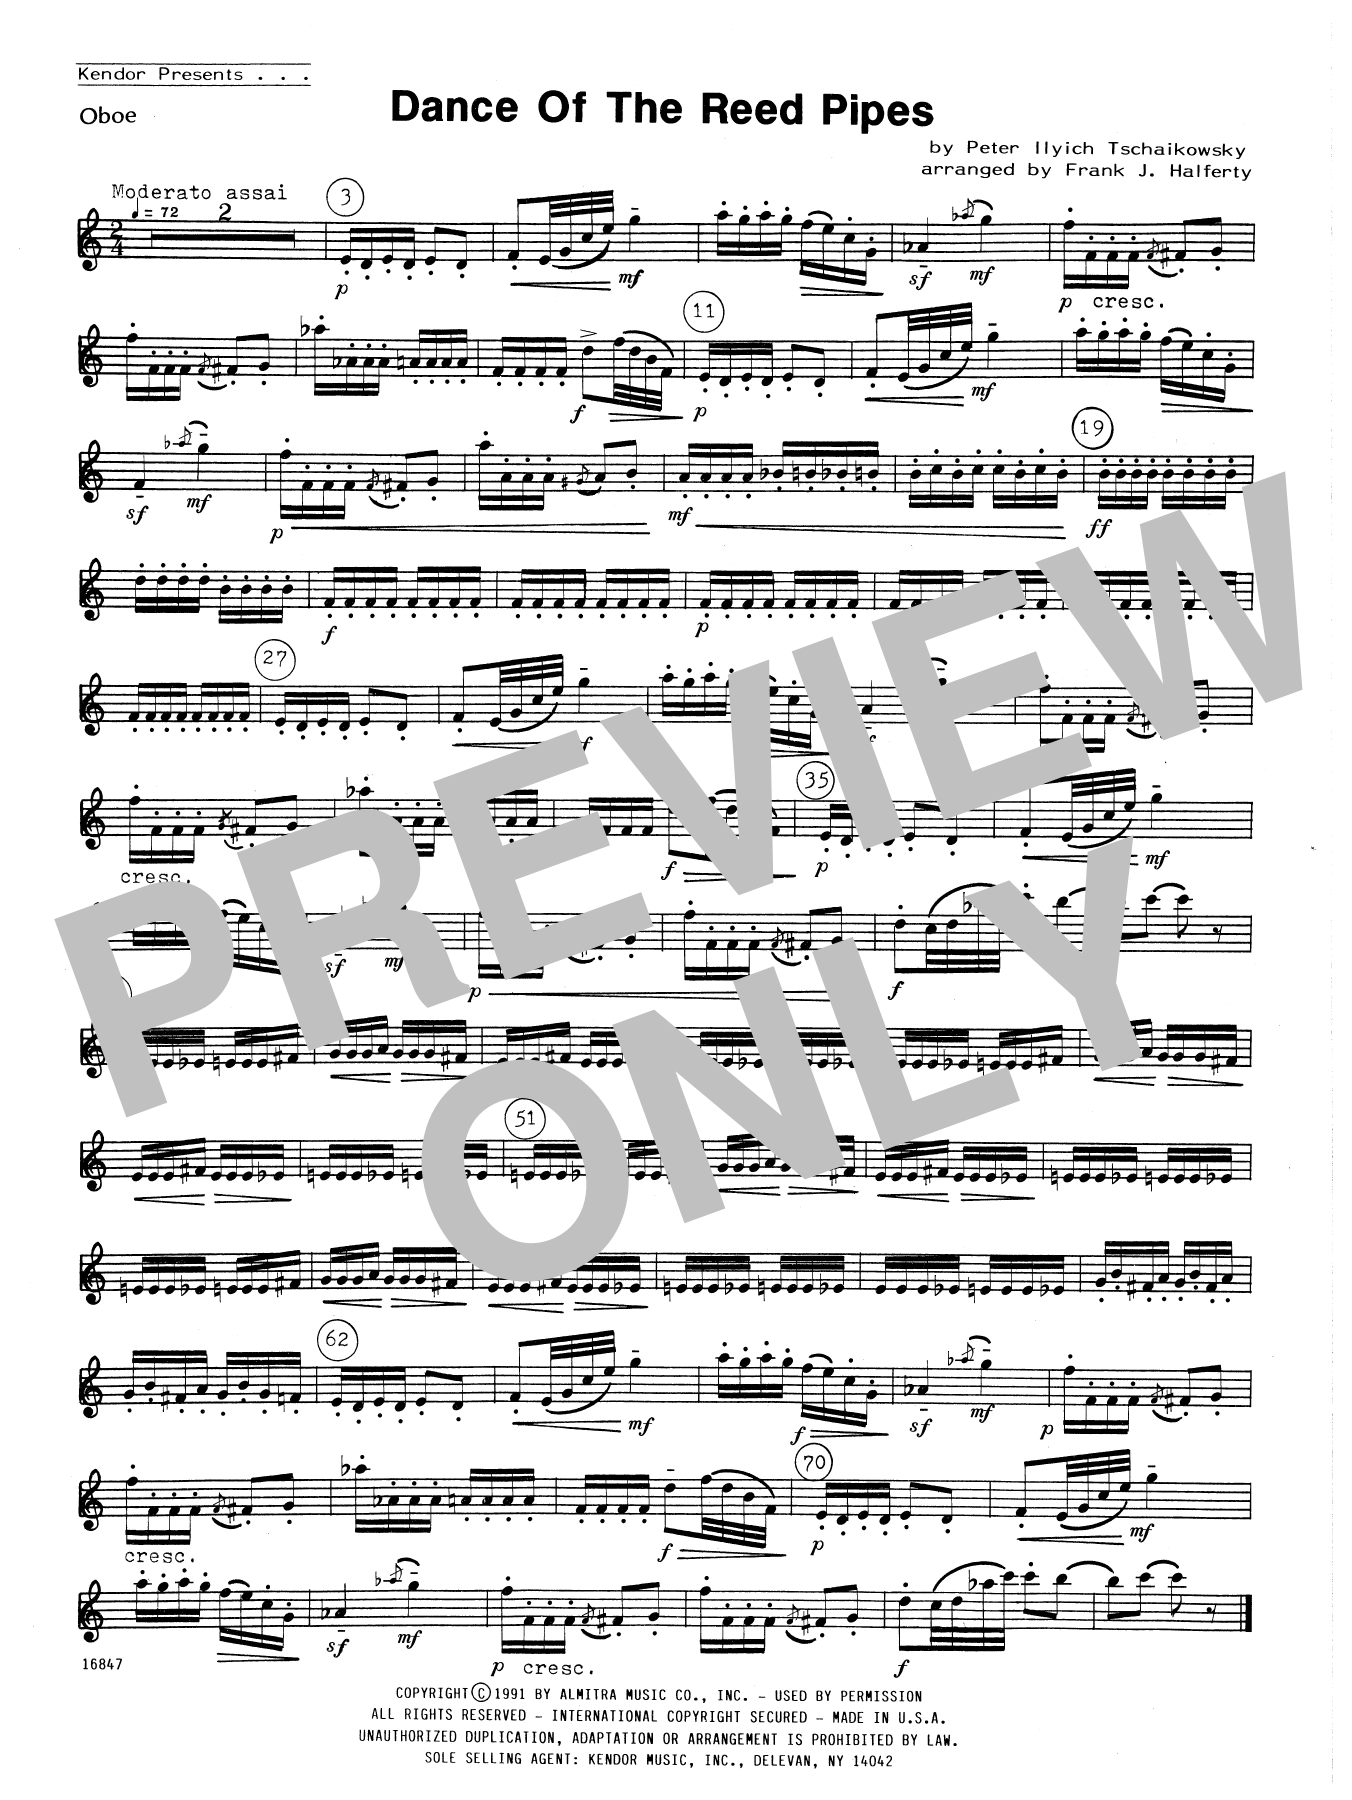 Download Frank J. Halferty Dance Of The Reed Pipes - Oboe Sheet Music